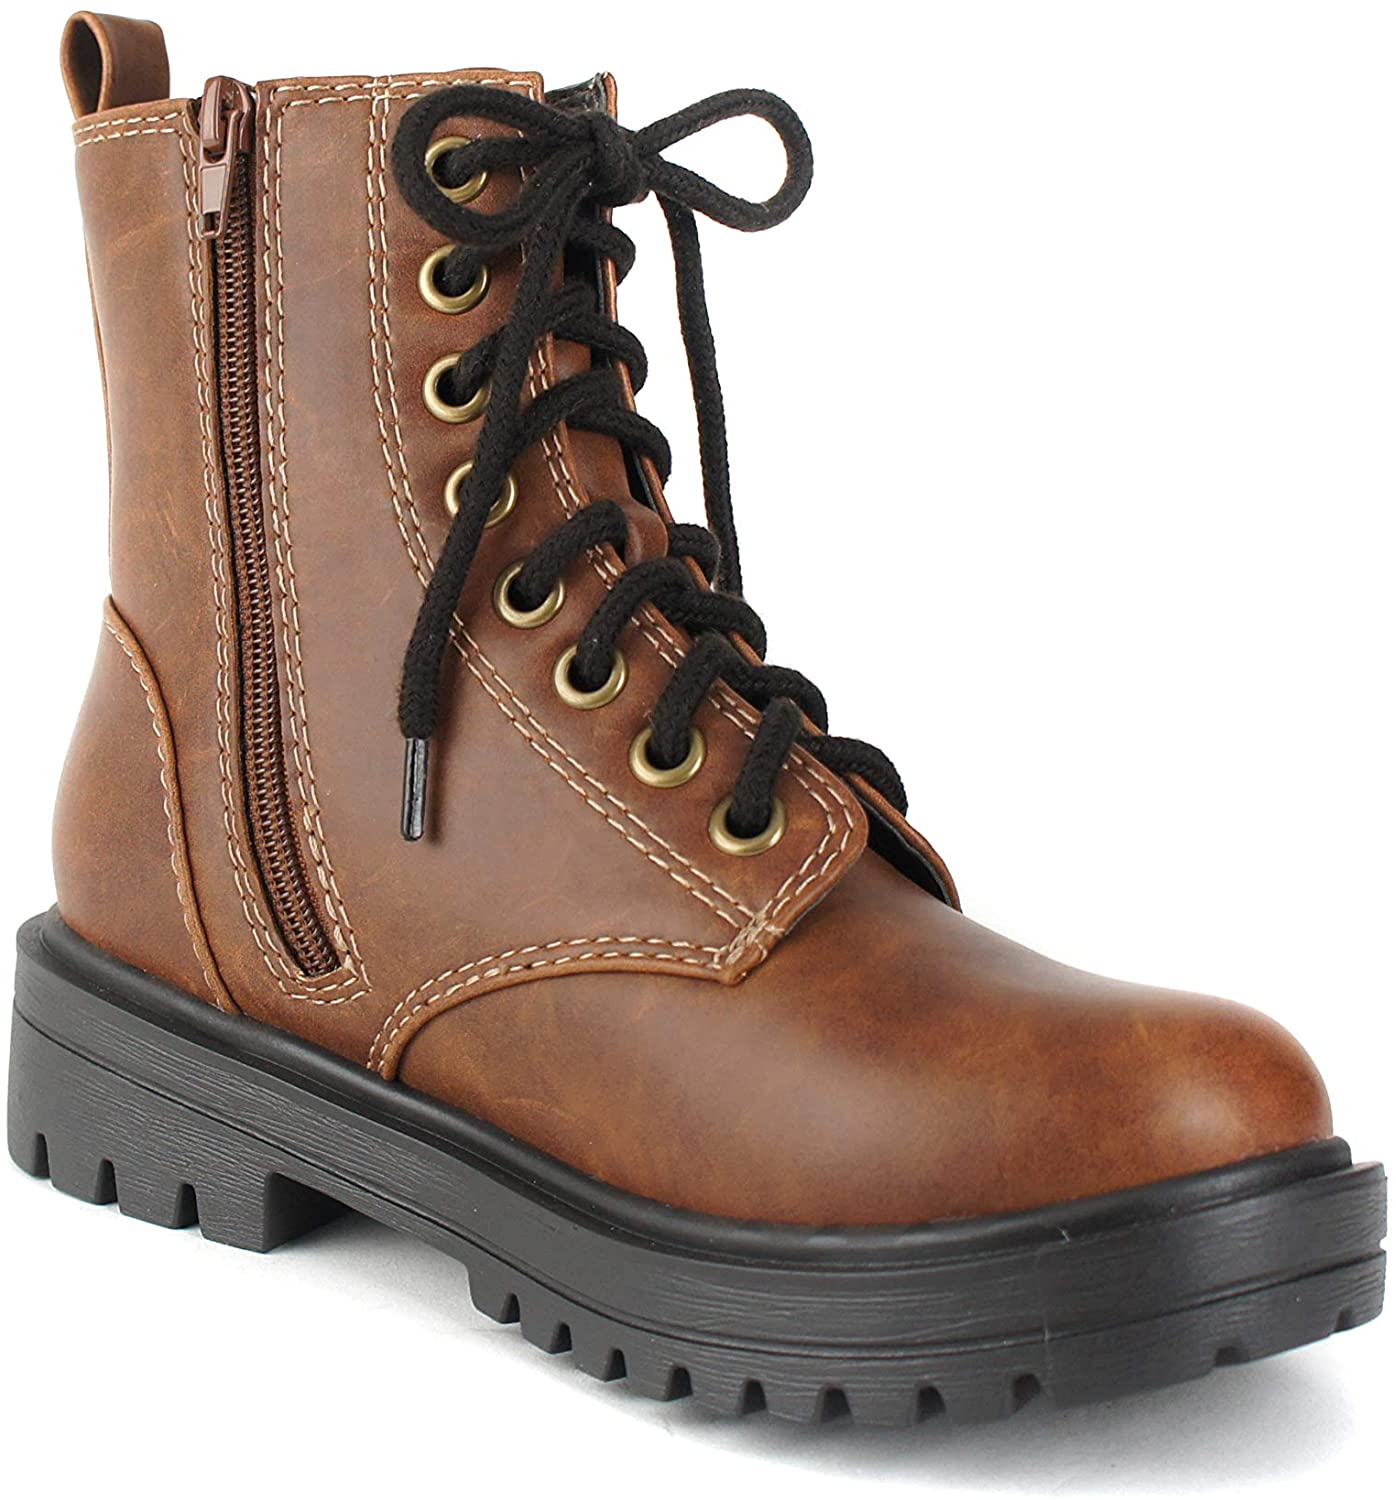 FIRM Whiskey Combat Boot